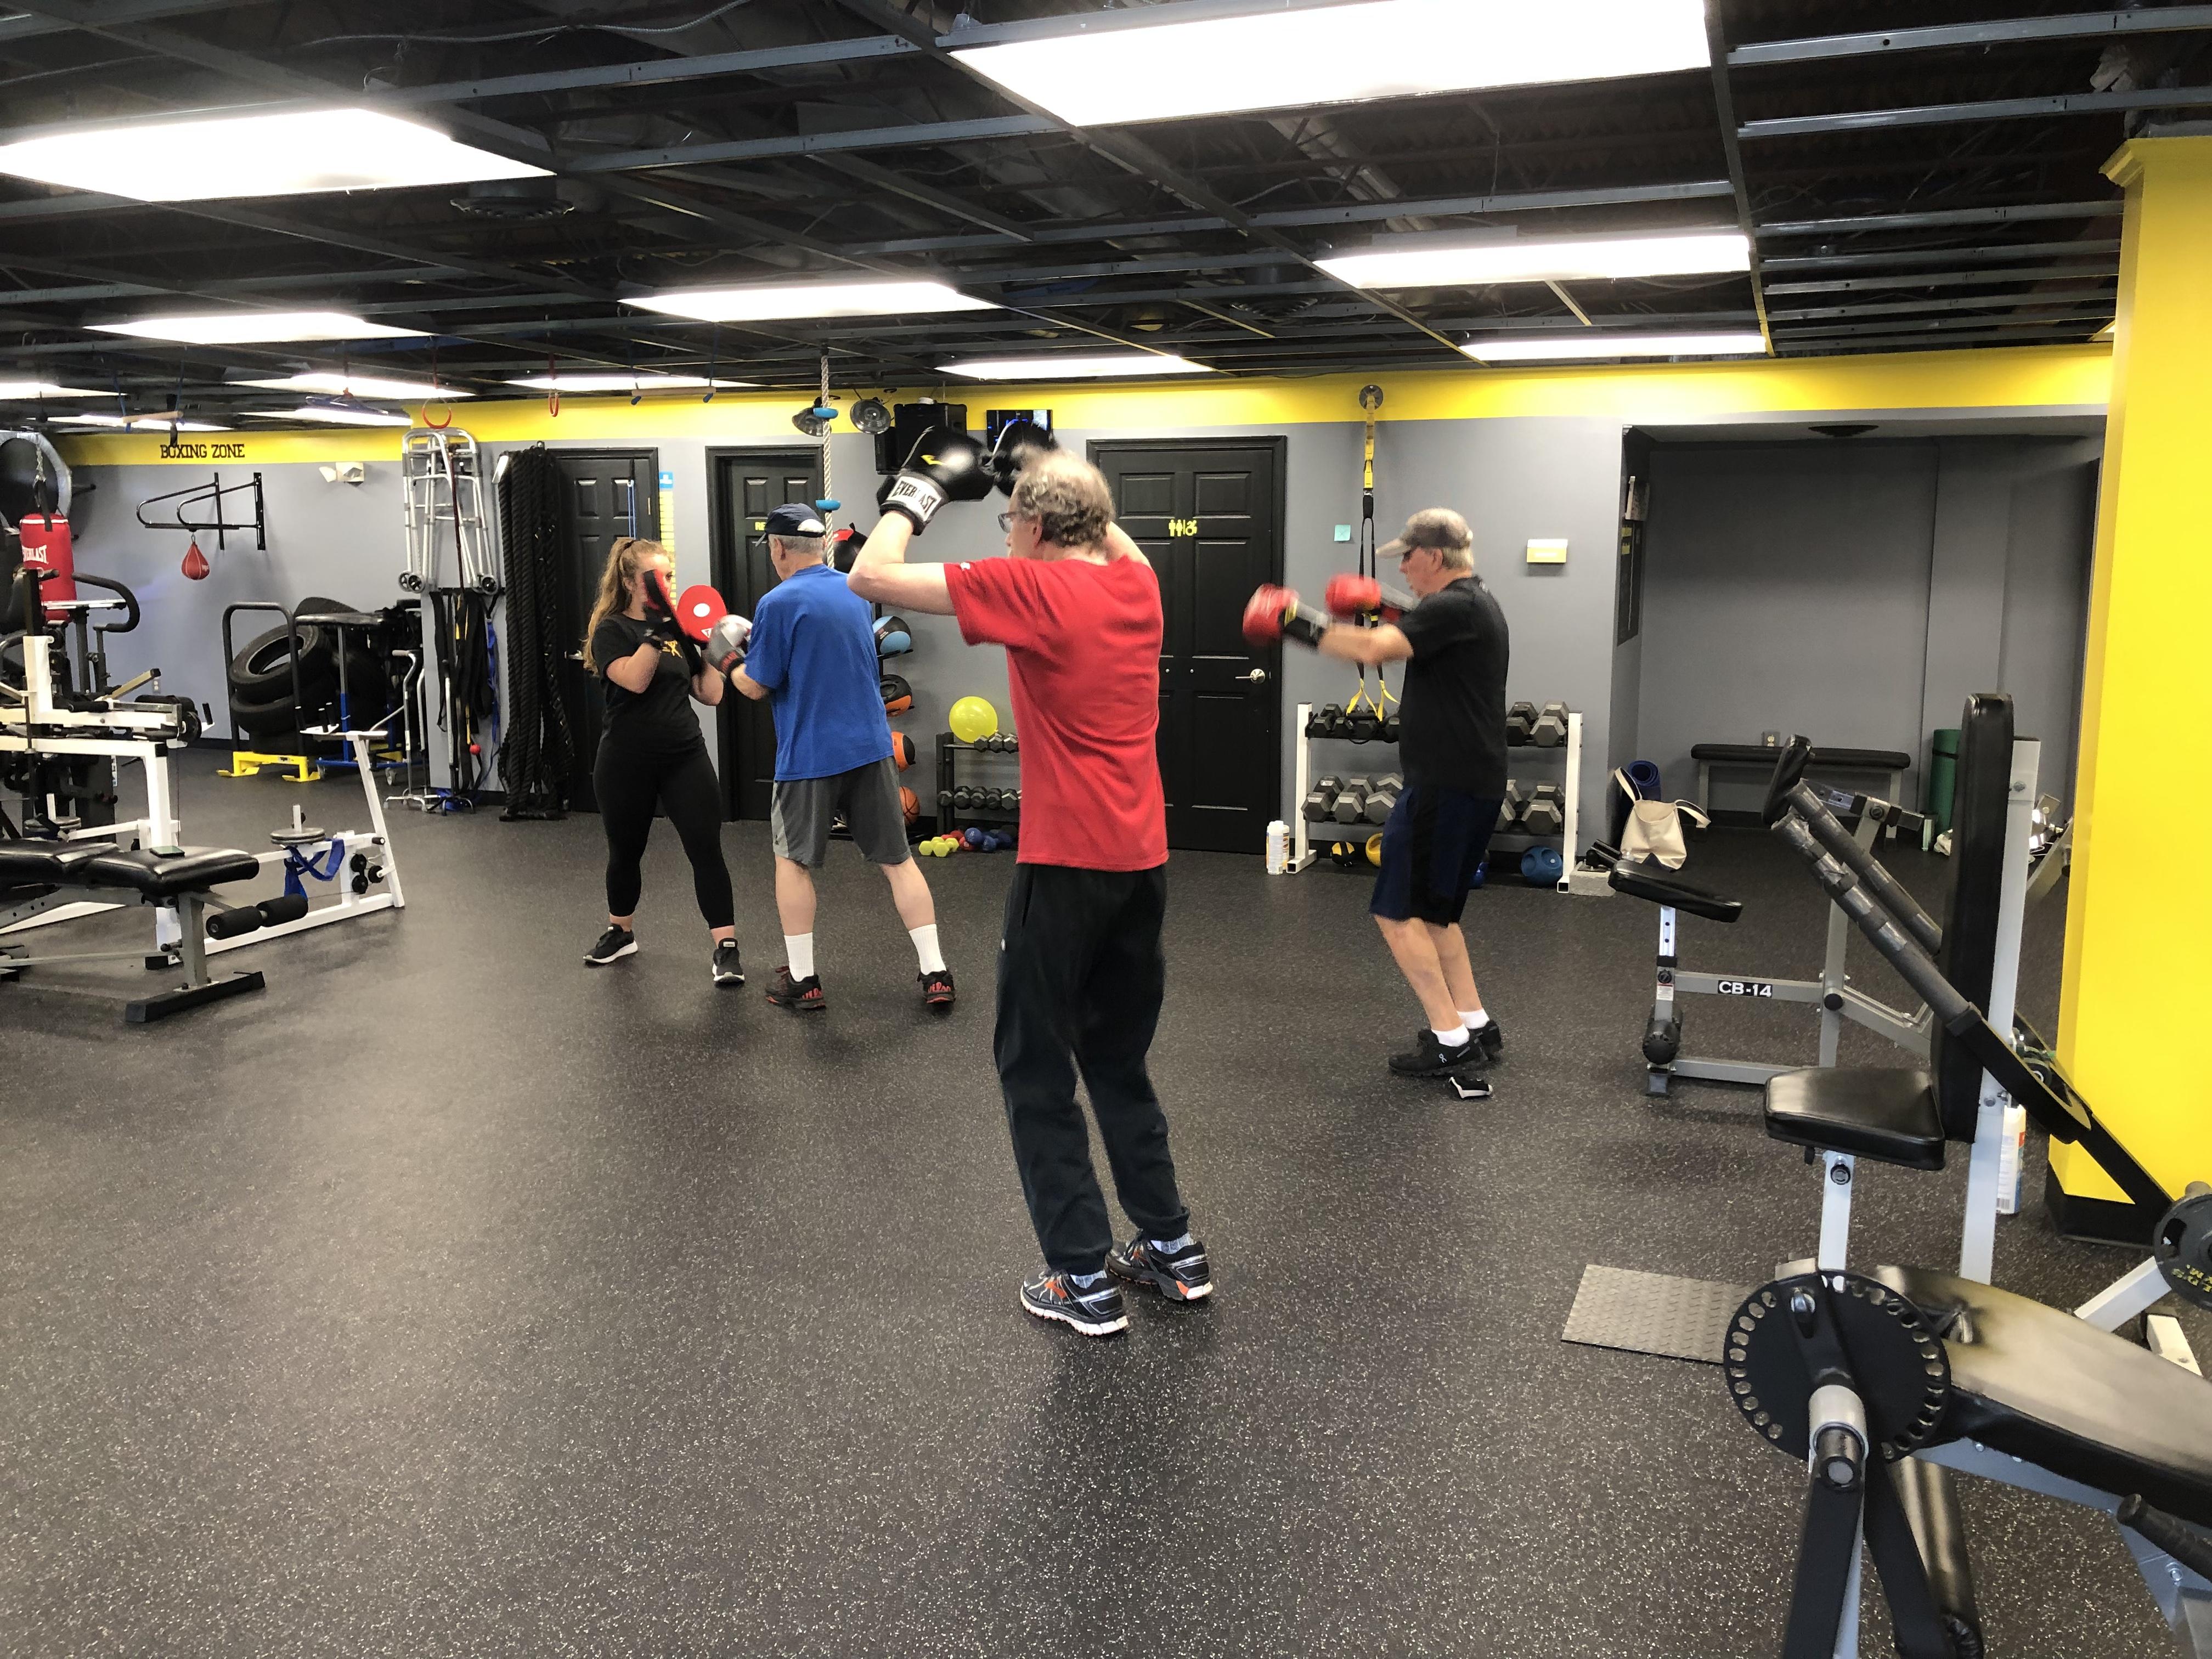 Tuesday-Rock Steady Boxing (For Parkinson's Clients) at DPI Adaptive Fitness ($25)